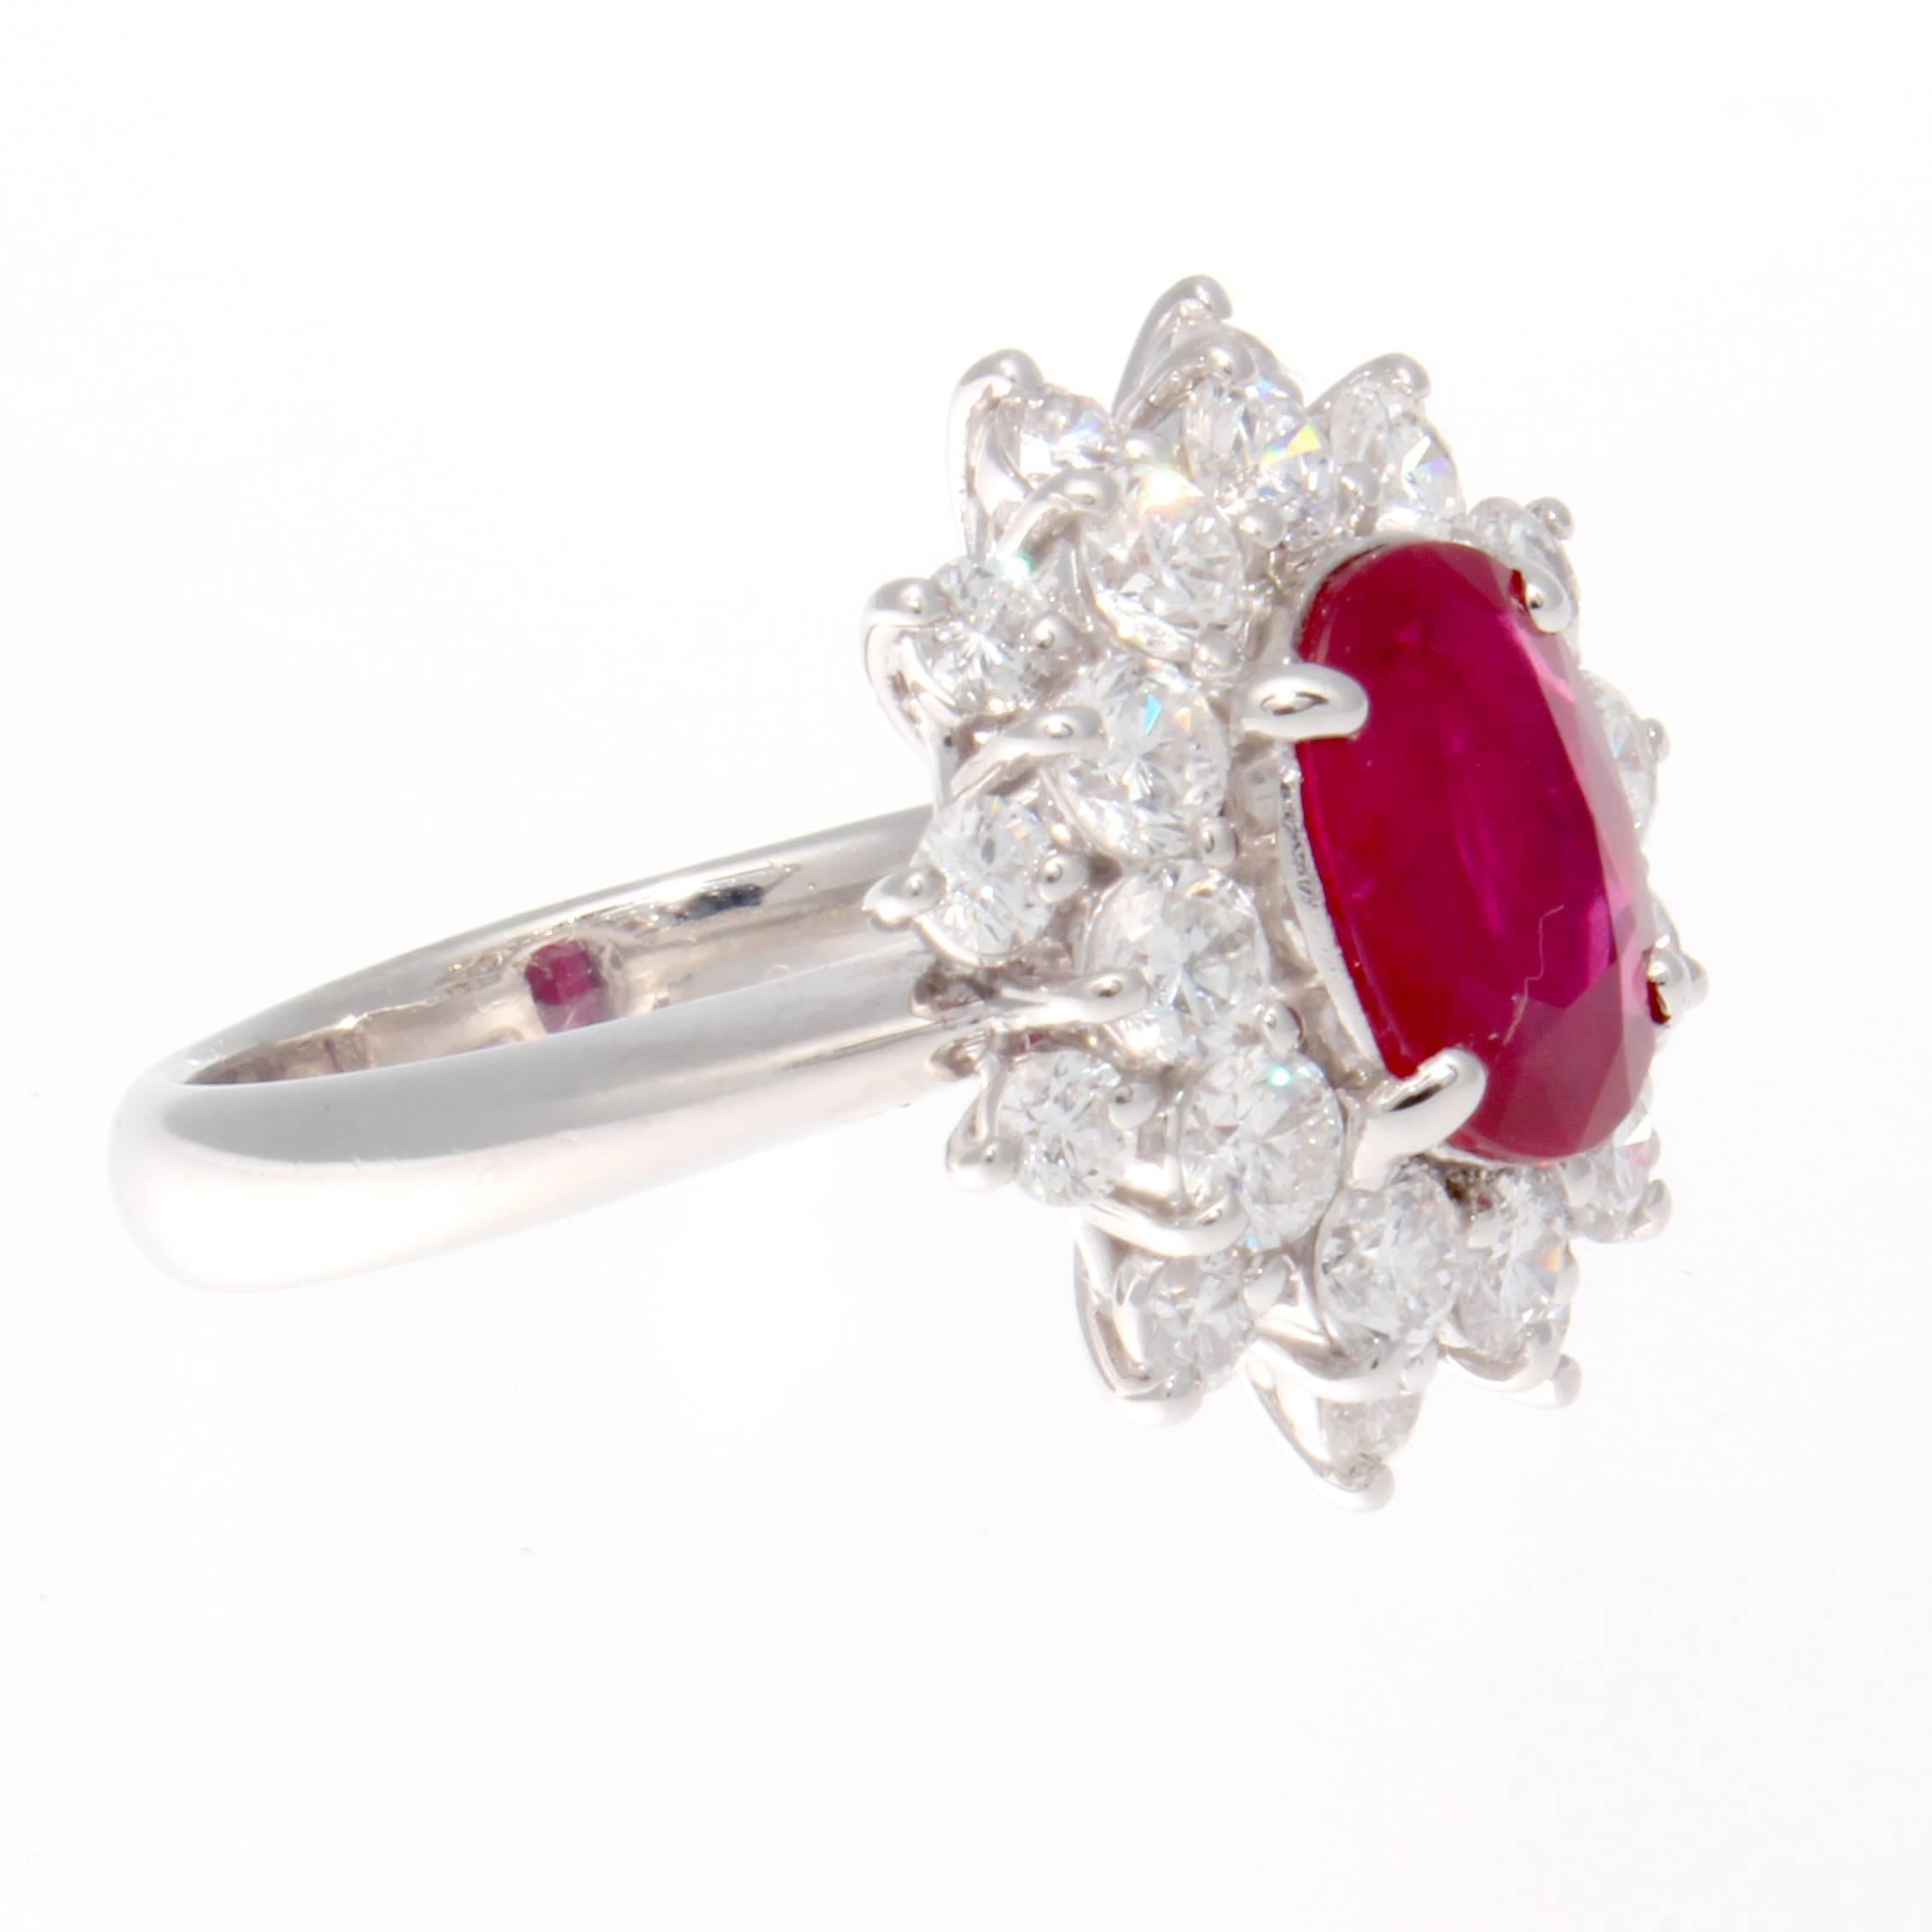 A natural 3.03 carat gem quality ruby has been AGL certified as Burmese origin with indications of heat treatment. The deep rich red oval cut ruby has been surrounded by a blooming flower motif of near colorless round cut diamonds. Hand crafted in